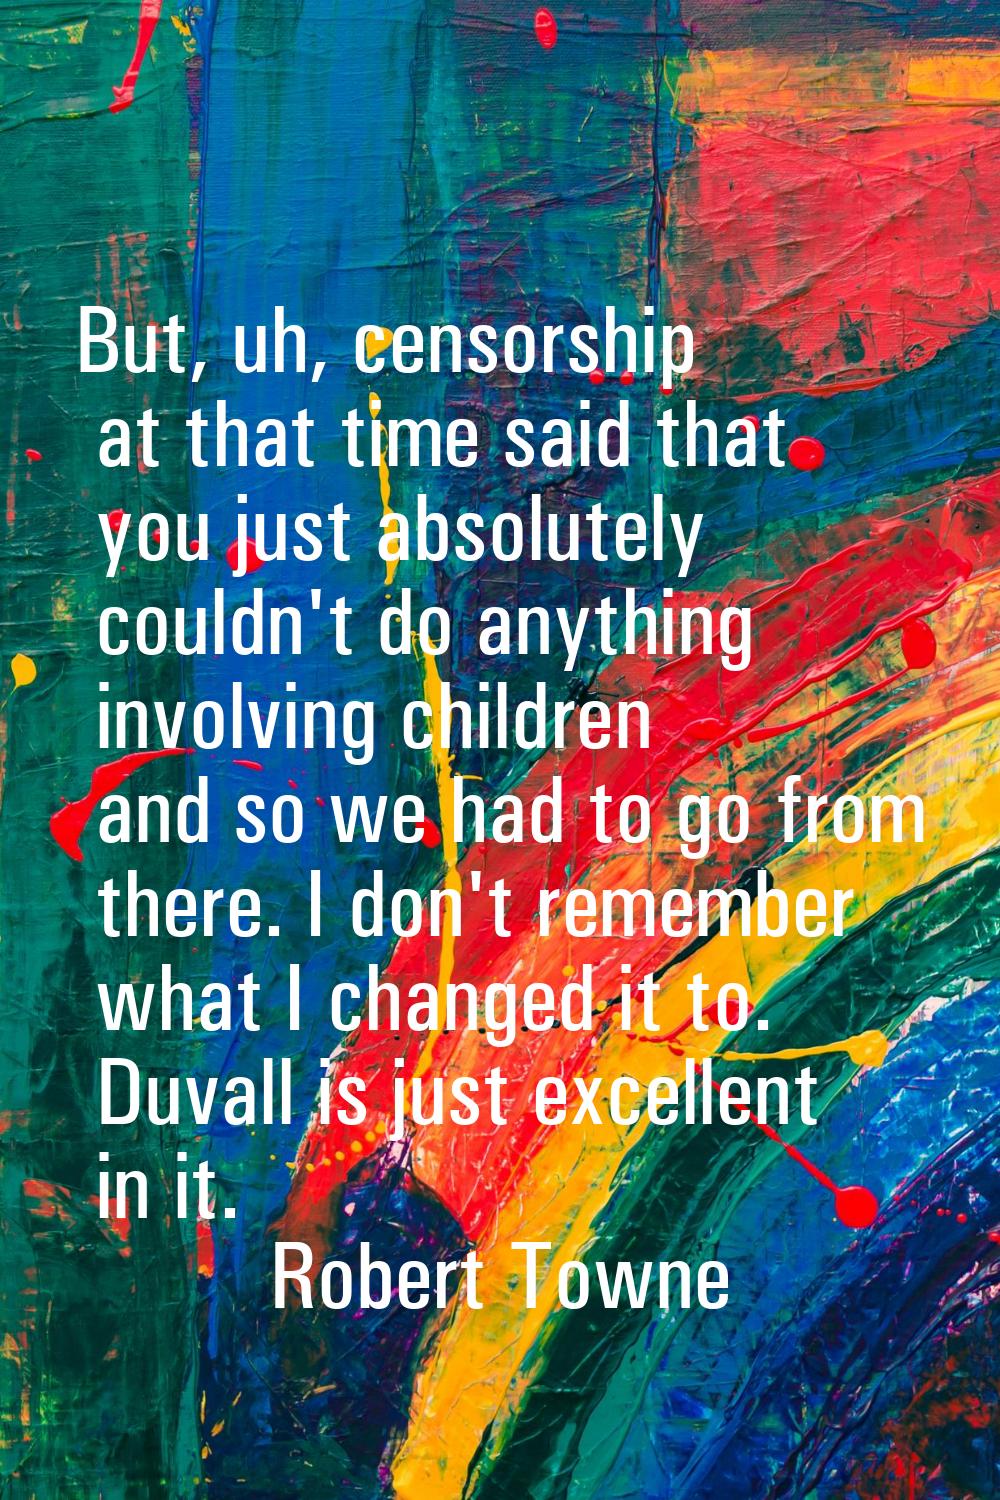 But, uh, censorship at that time said that you just absolutely couldn't do anything involving child